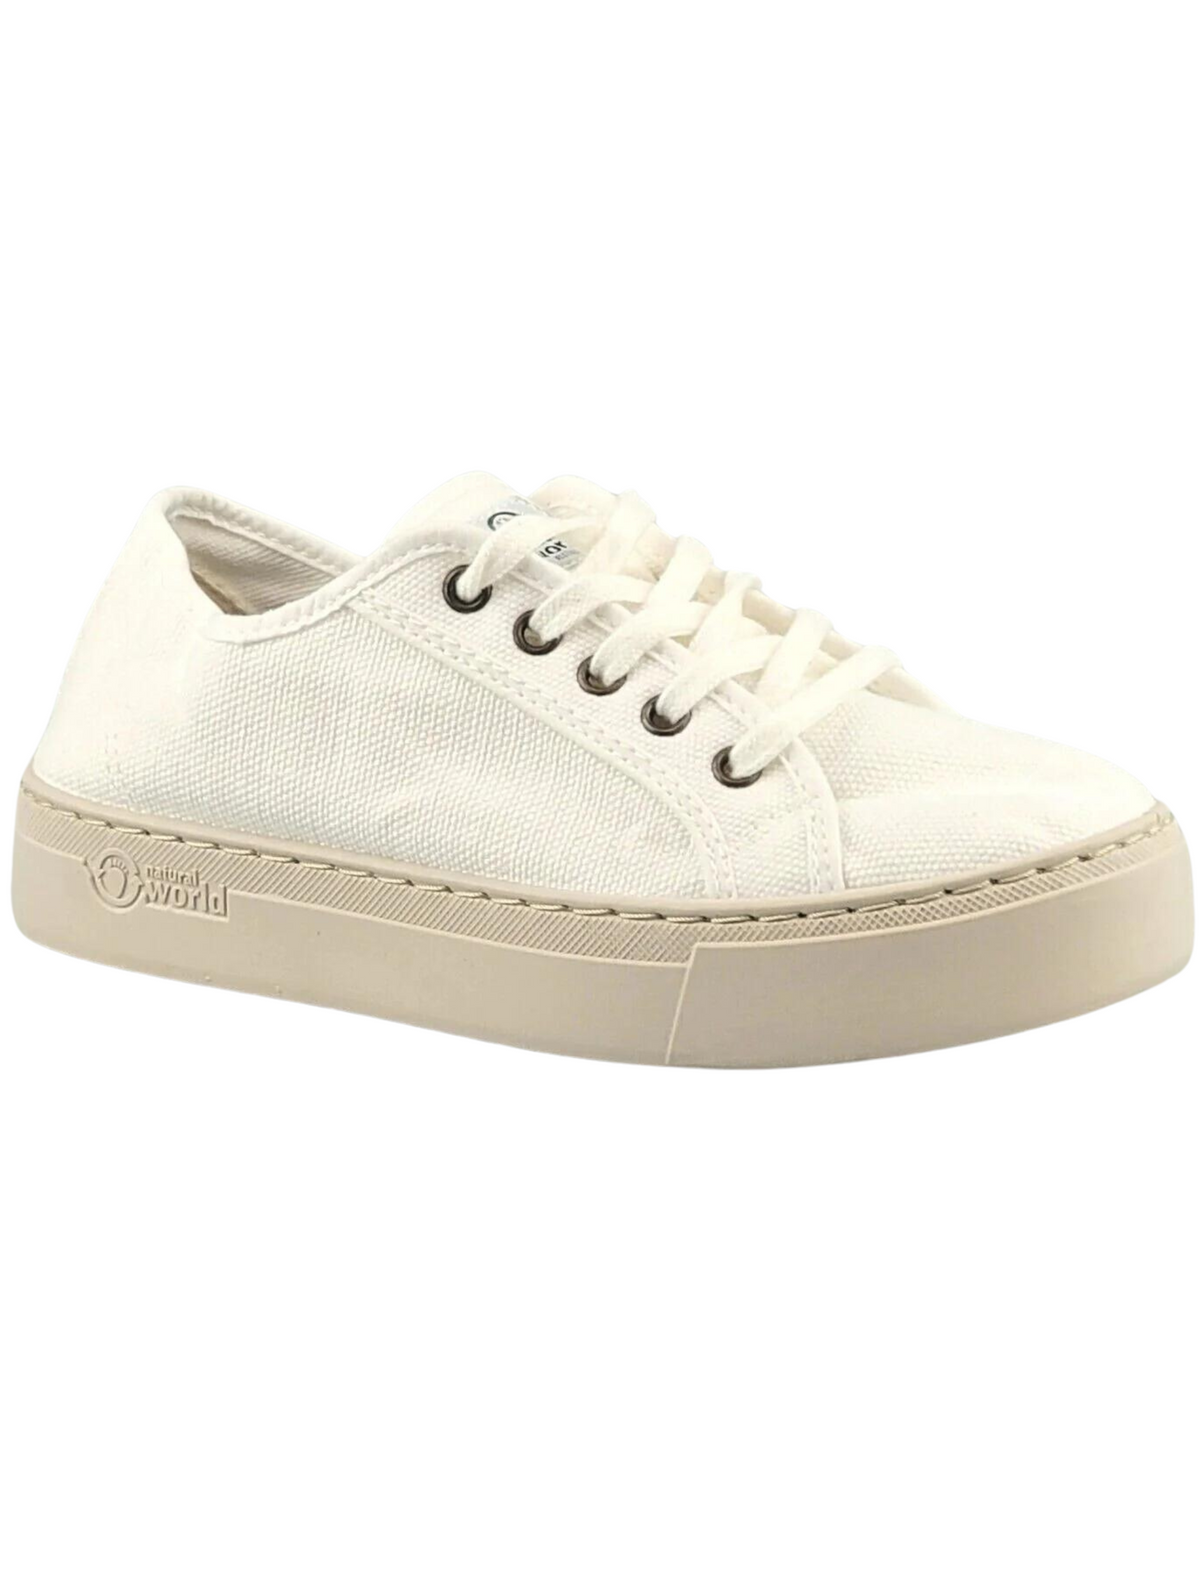 White canvas shoe with nude base